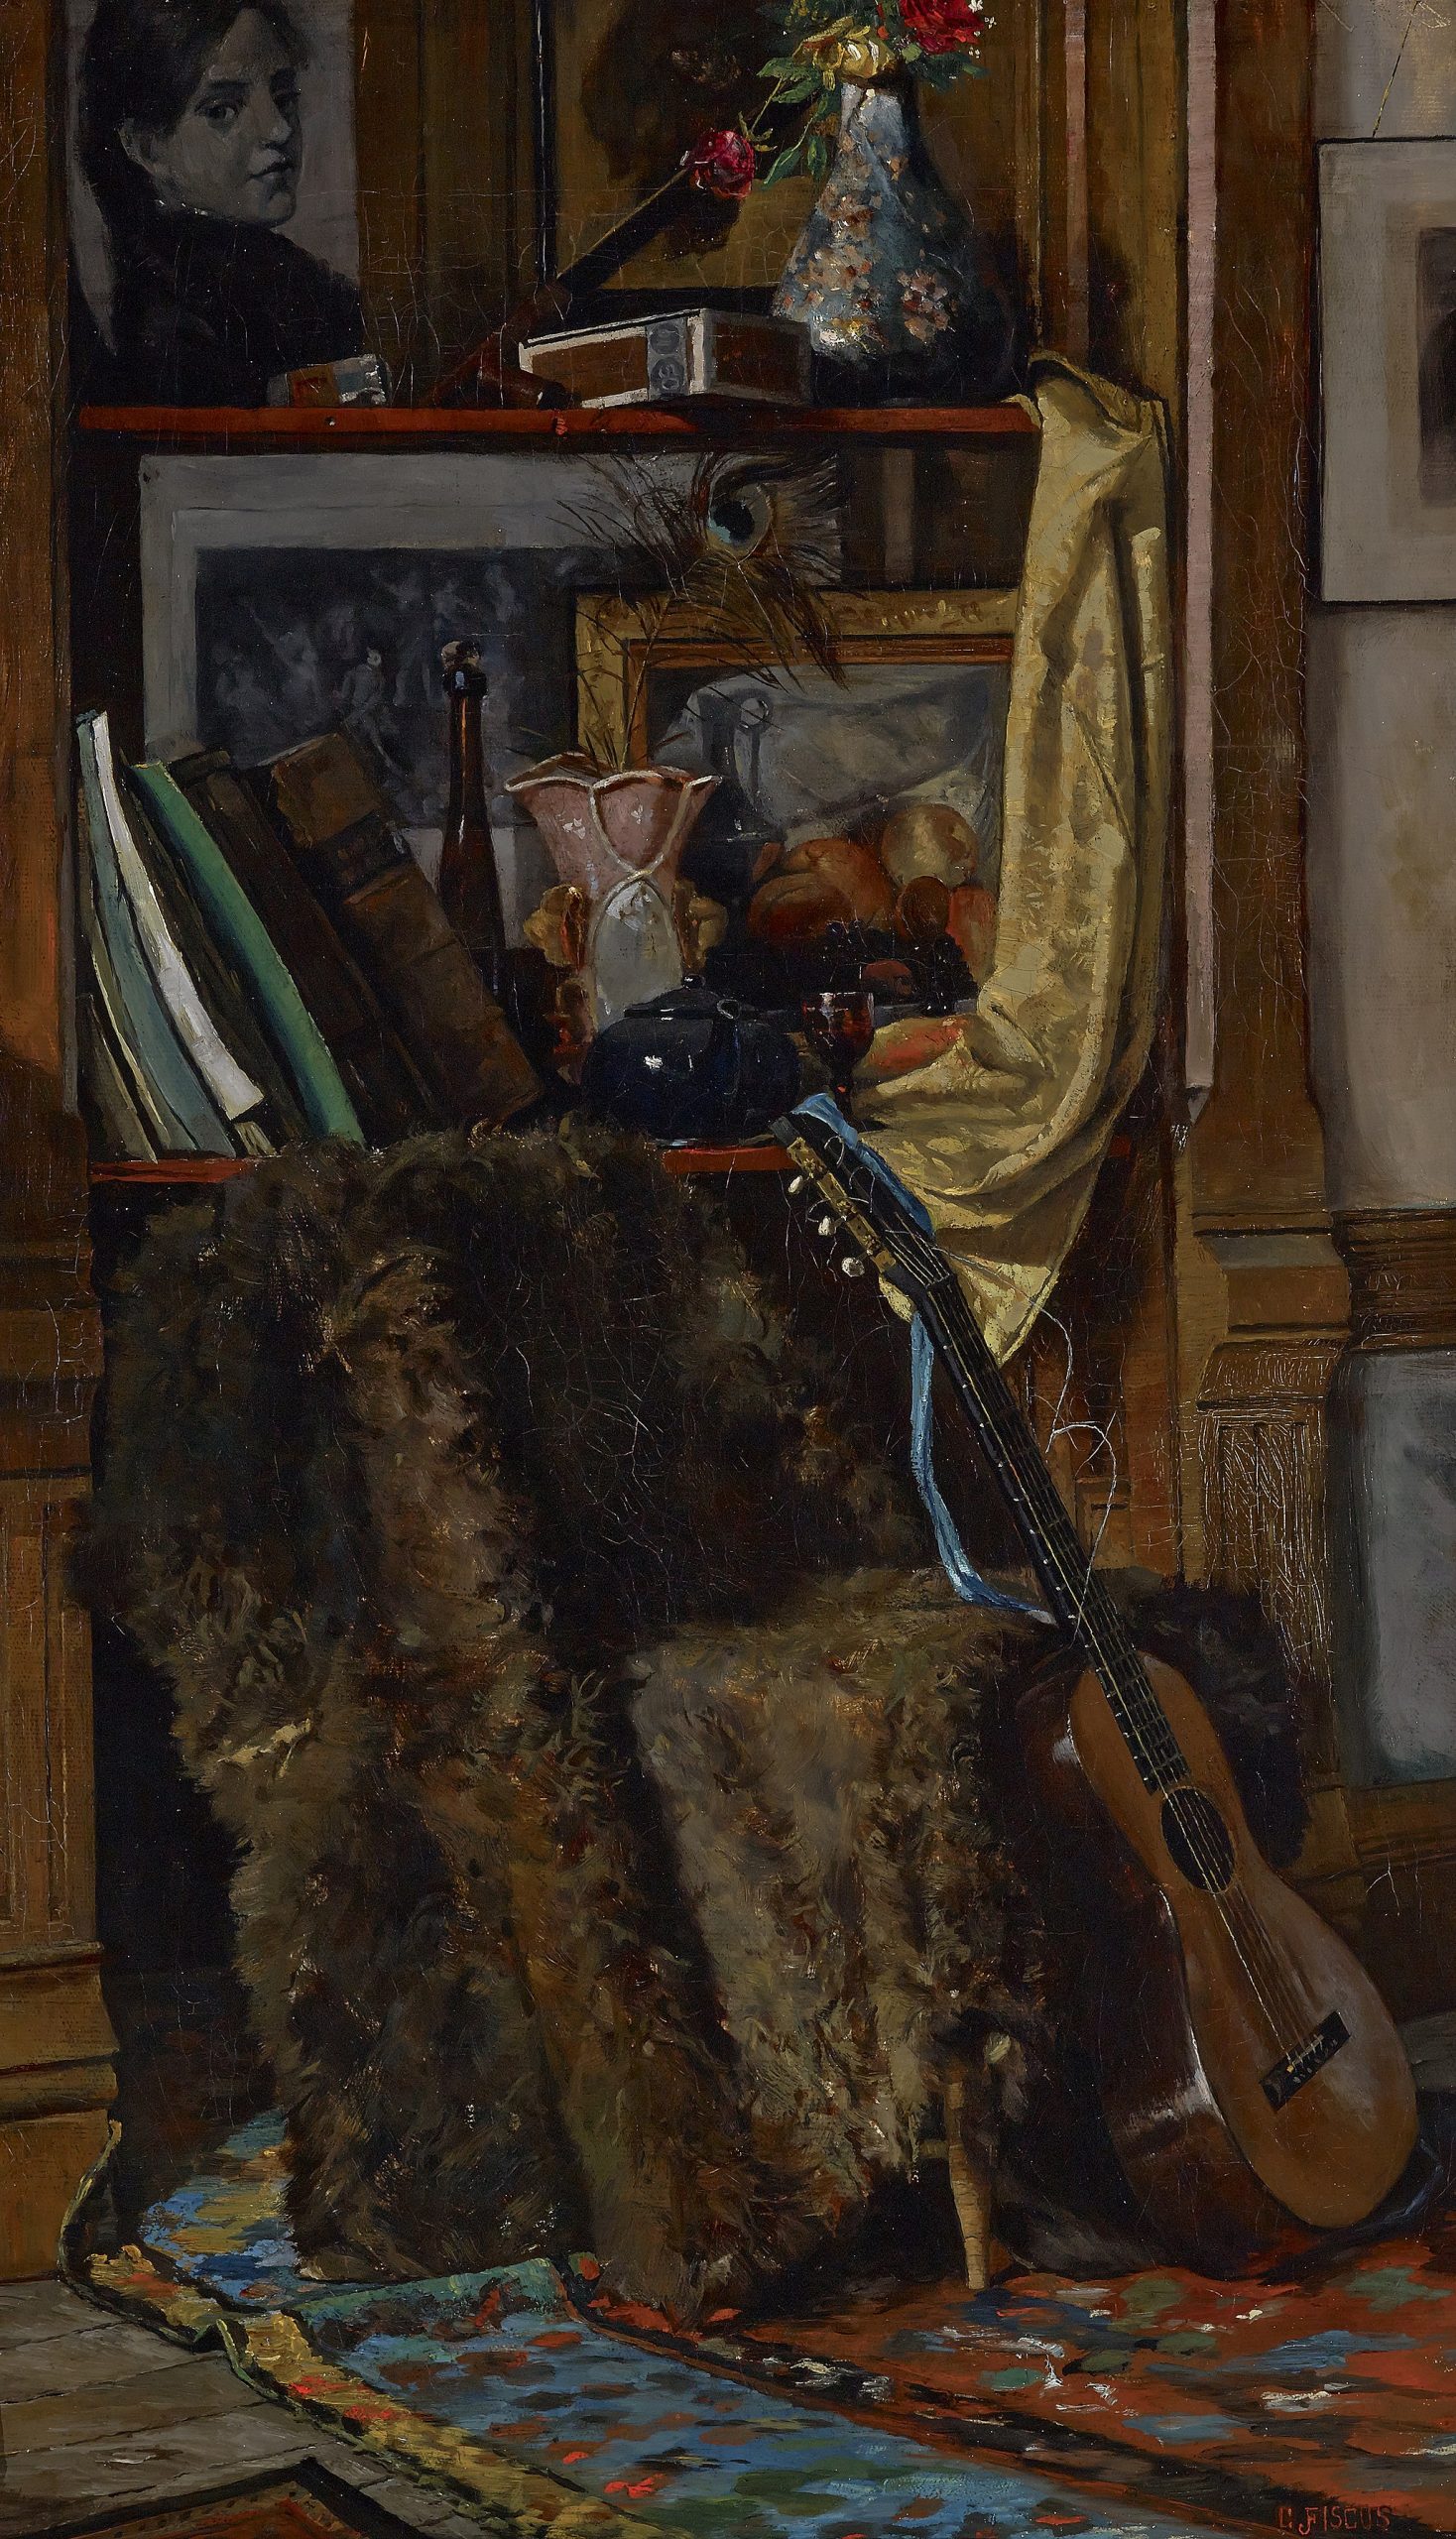 The oil painting shows the artist's corner nook containing some paintings, a charcoal drawing, leather-bound books and various objets d'jart. In front of these, on a colorful rug, a guitar leans against a chair which is covered by a fur throw.